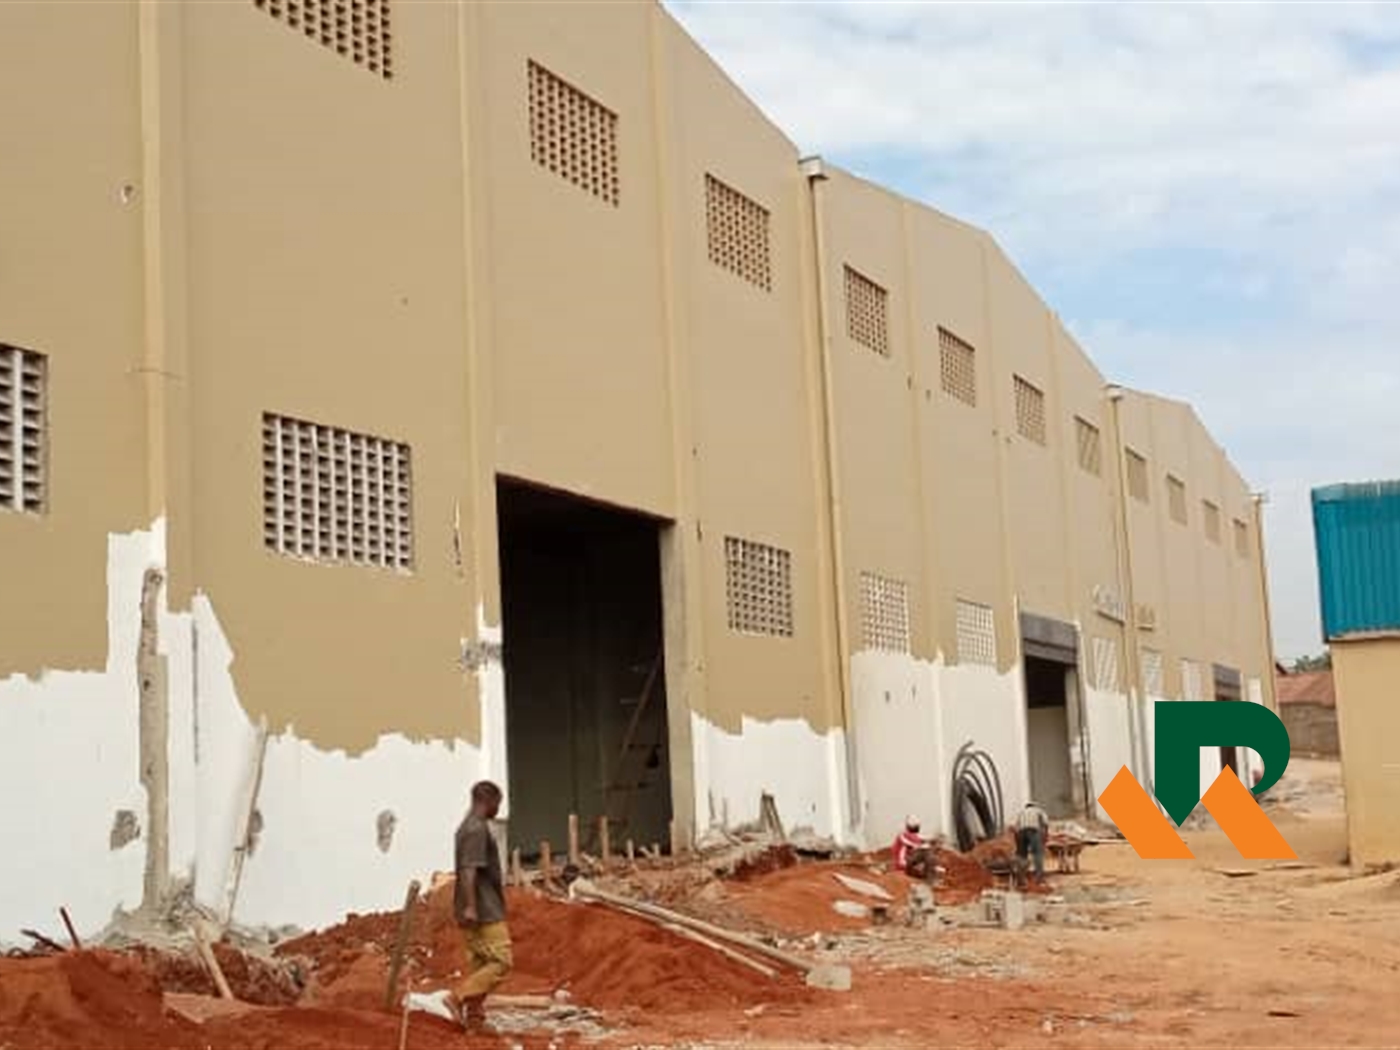 Warehouse for rent in Kawempe Kampala